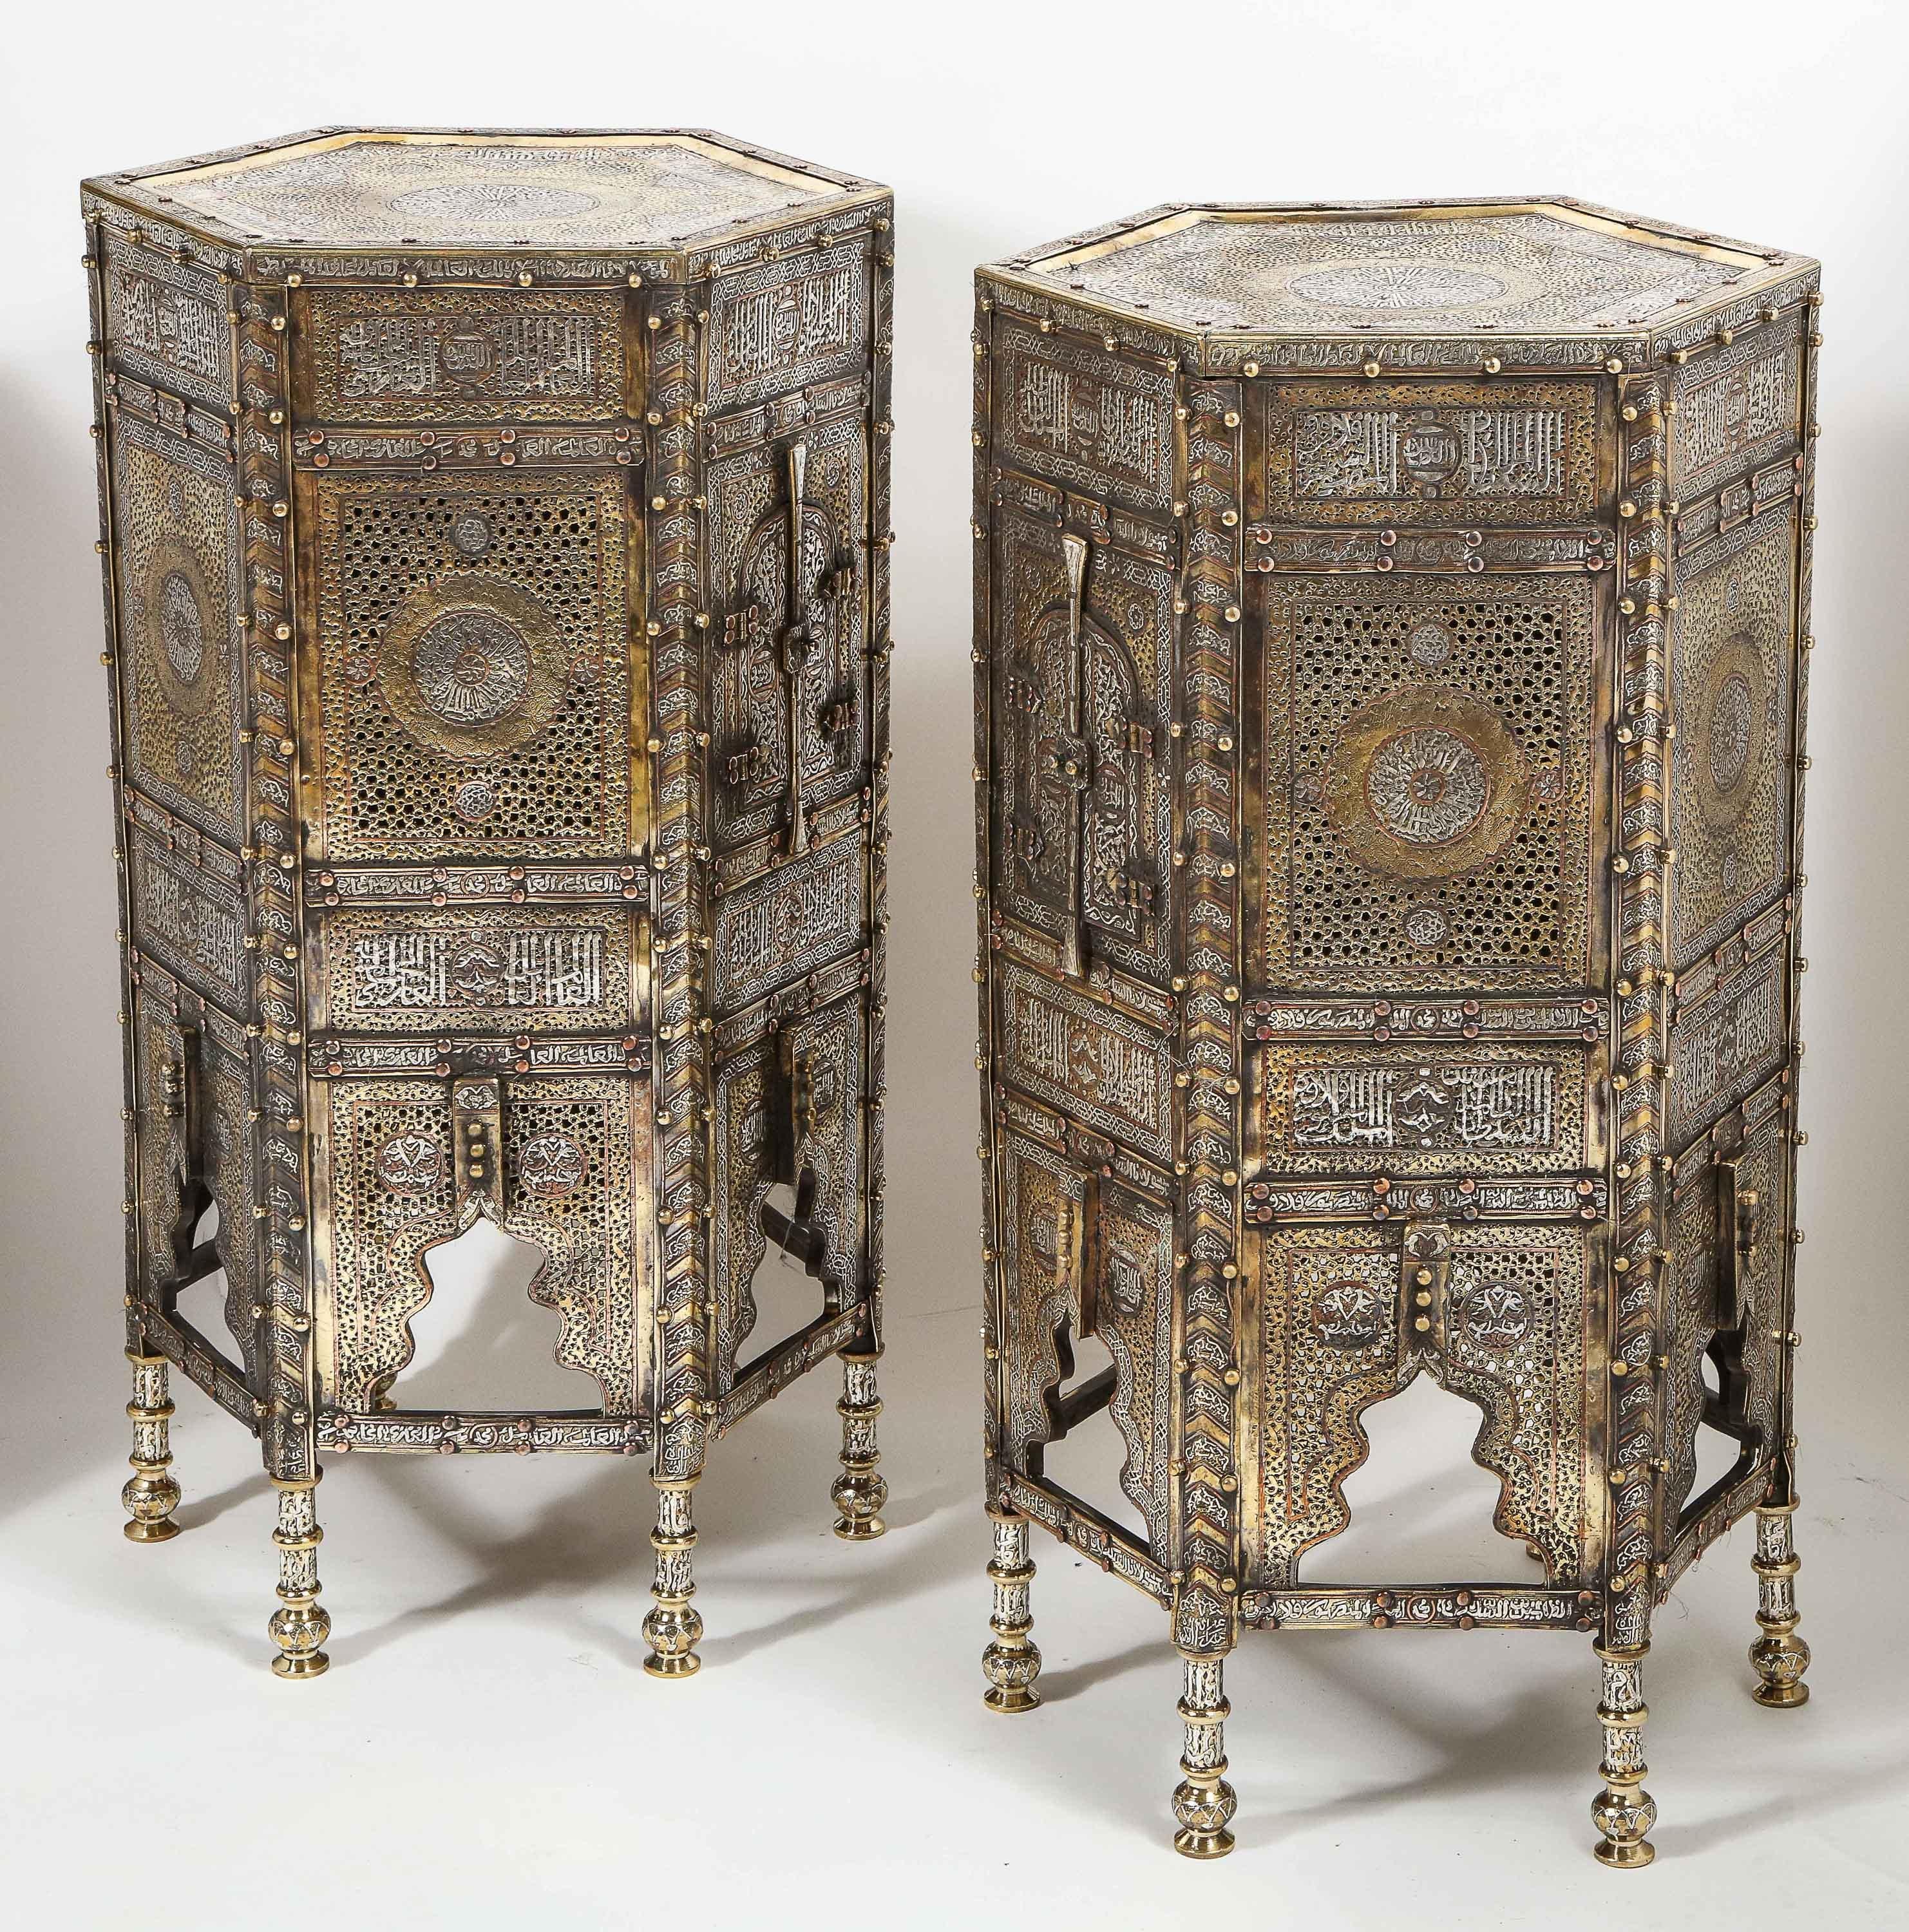 Exceptional Pair of Islamic Mamluk Revival Silver Inlaid Quran Side Tables For Sale 8